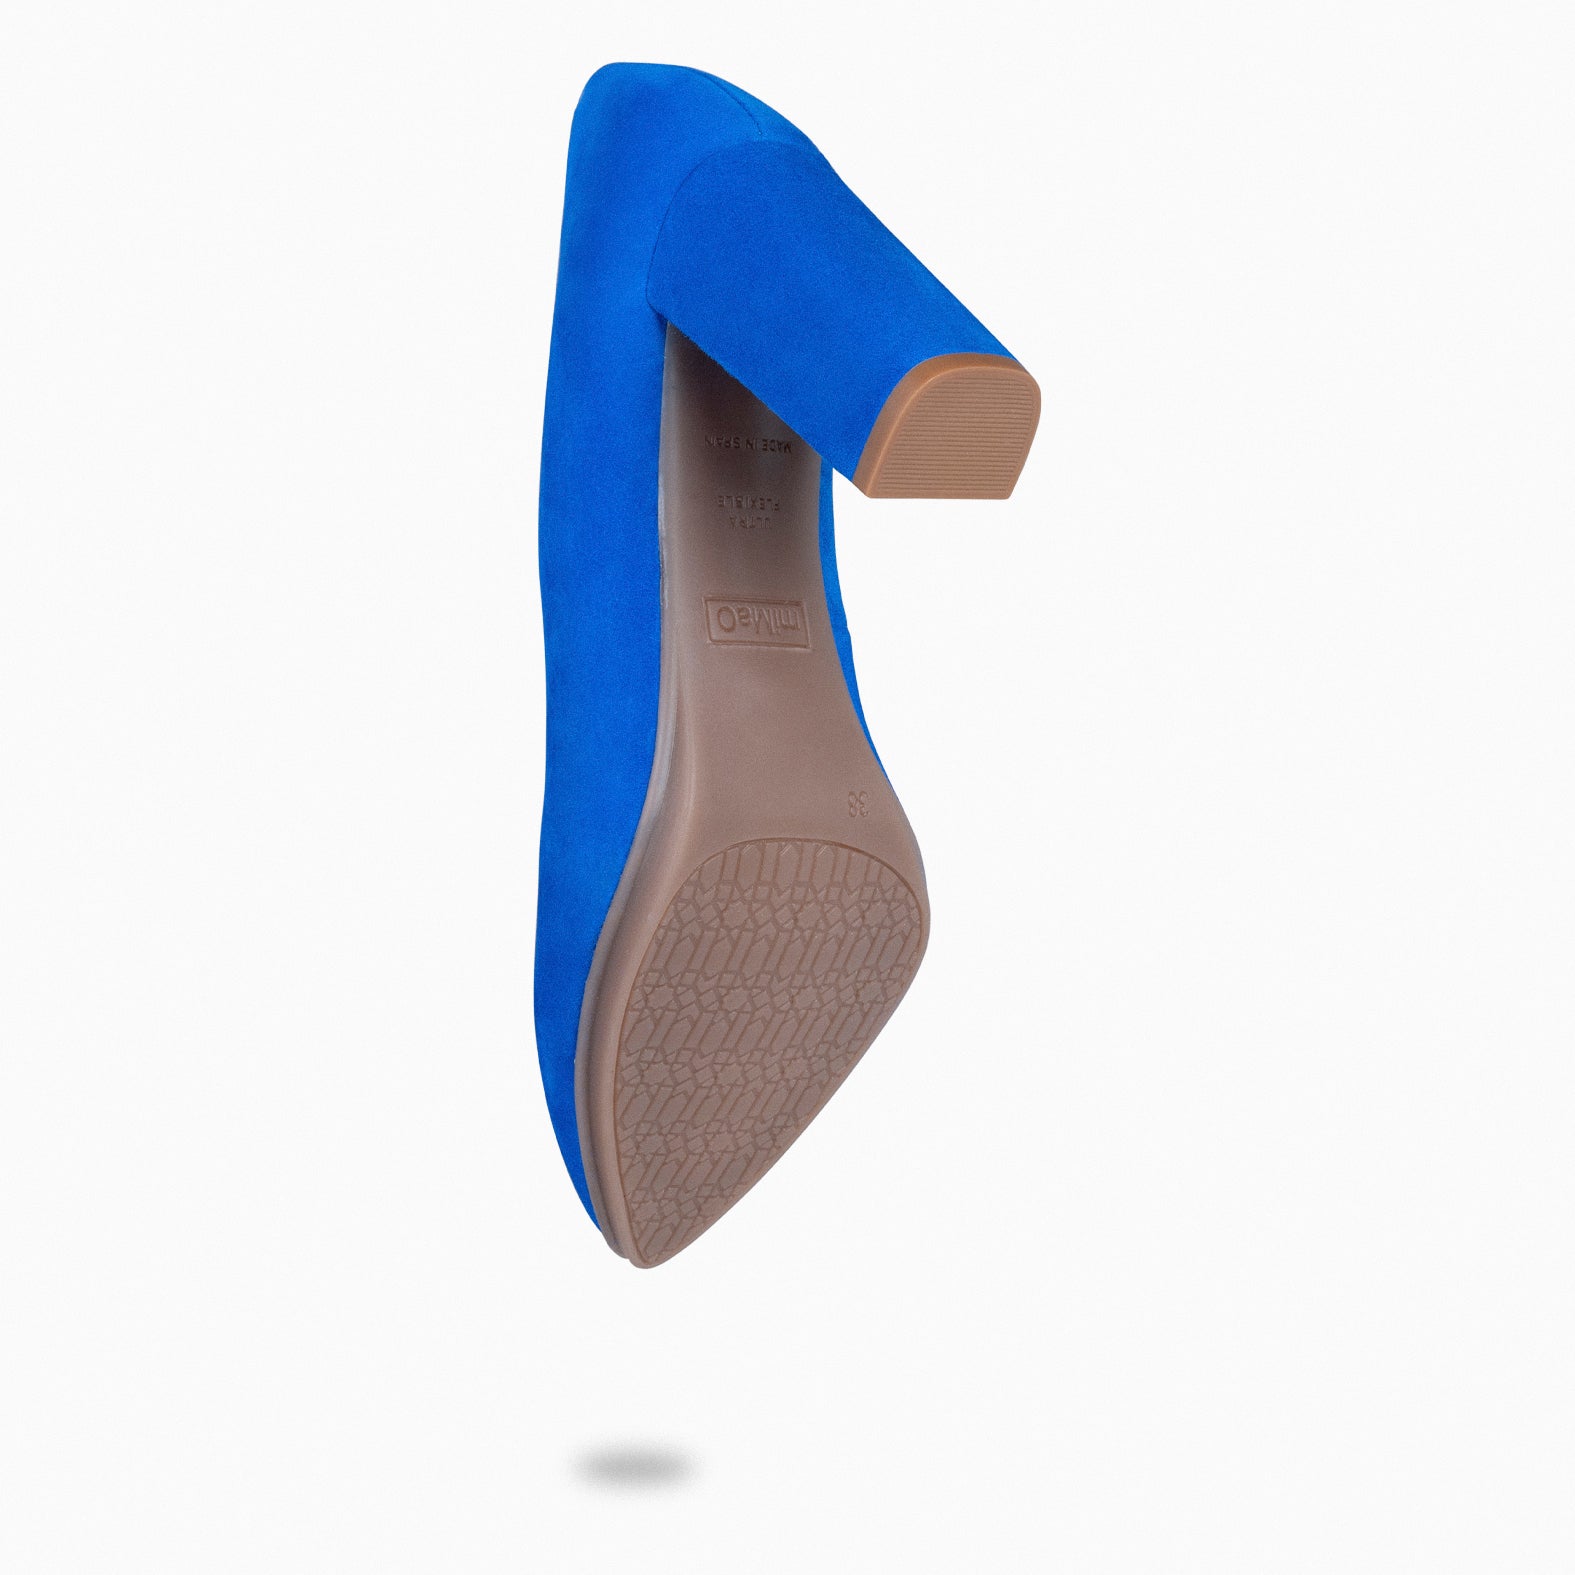 URBAN – BLUE Suede high-heeled shoes 